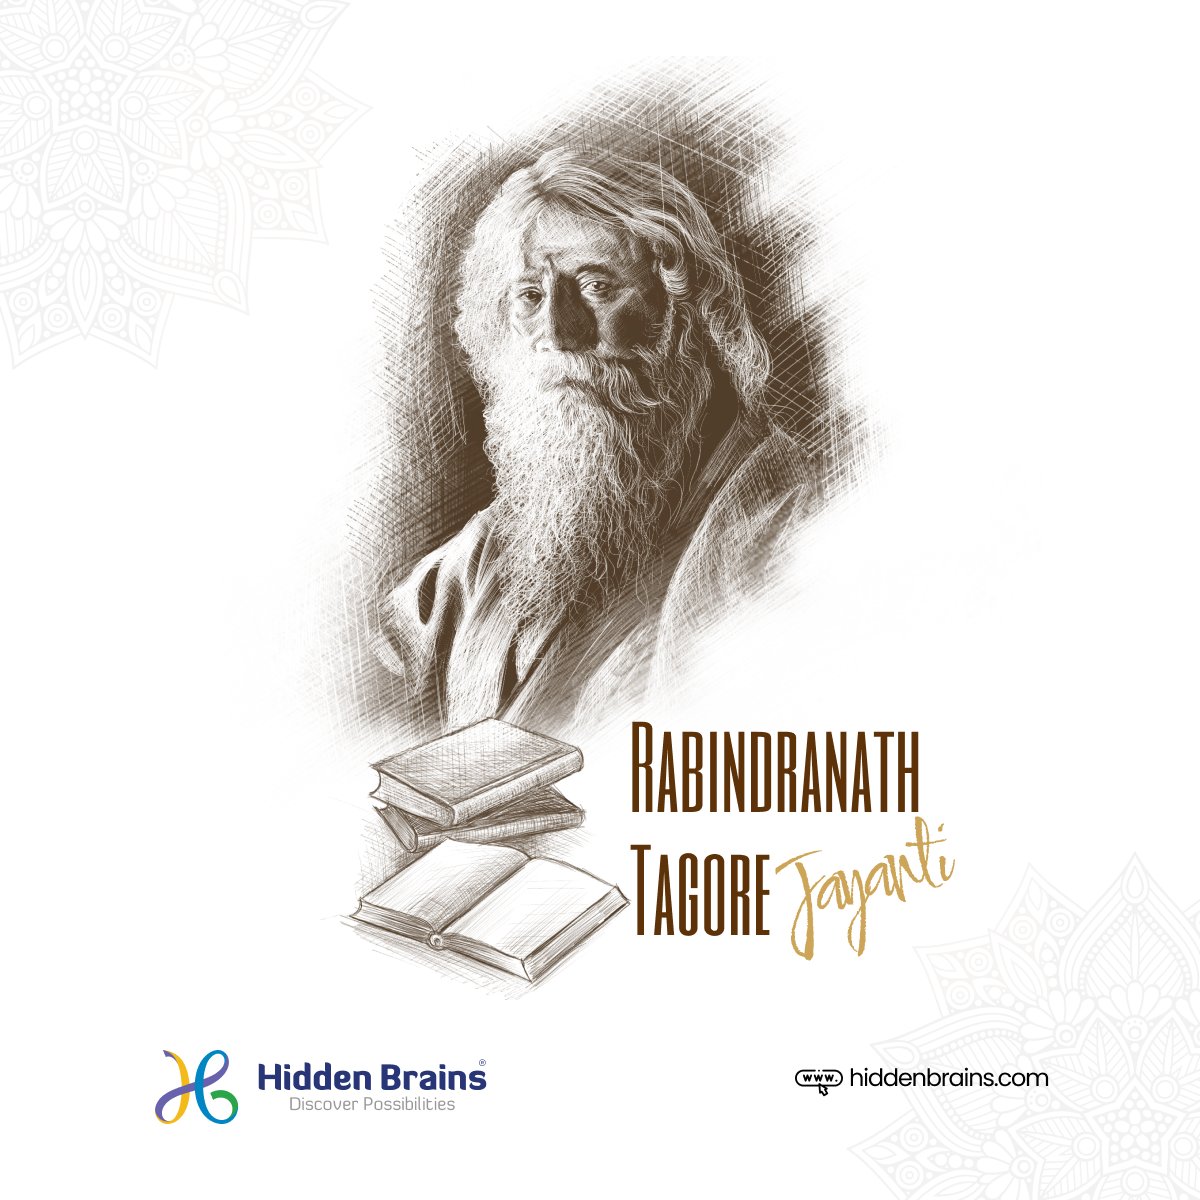 Happy Rabindranath Tagore Jayanti!

Today, we commemorate the birth anniversary of the legendary poet, philosopher, and Nobel laureate - Rabindranath Tagore. His timeless works continue to inspire the world.

#TagoreJayanti #CelebratingTagore #RabindranathTagore #HiddenBrains